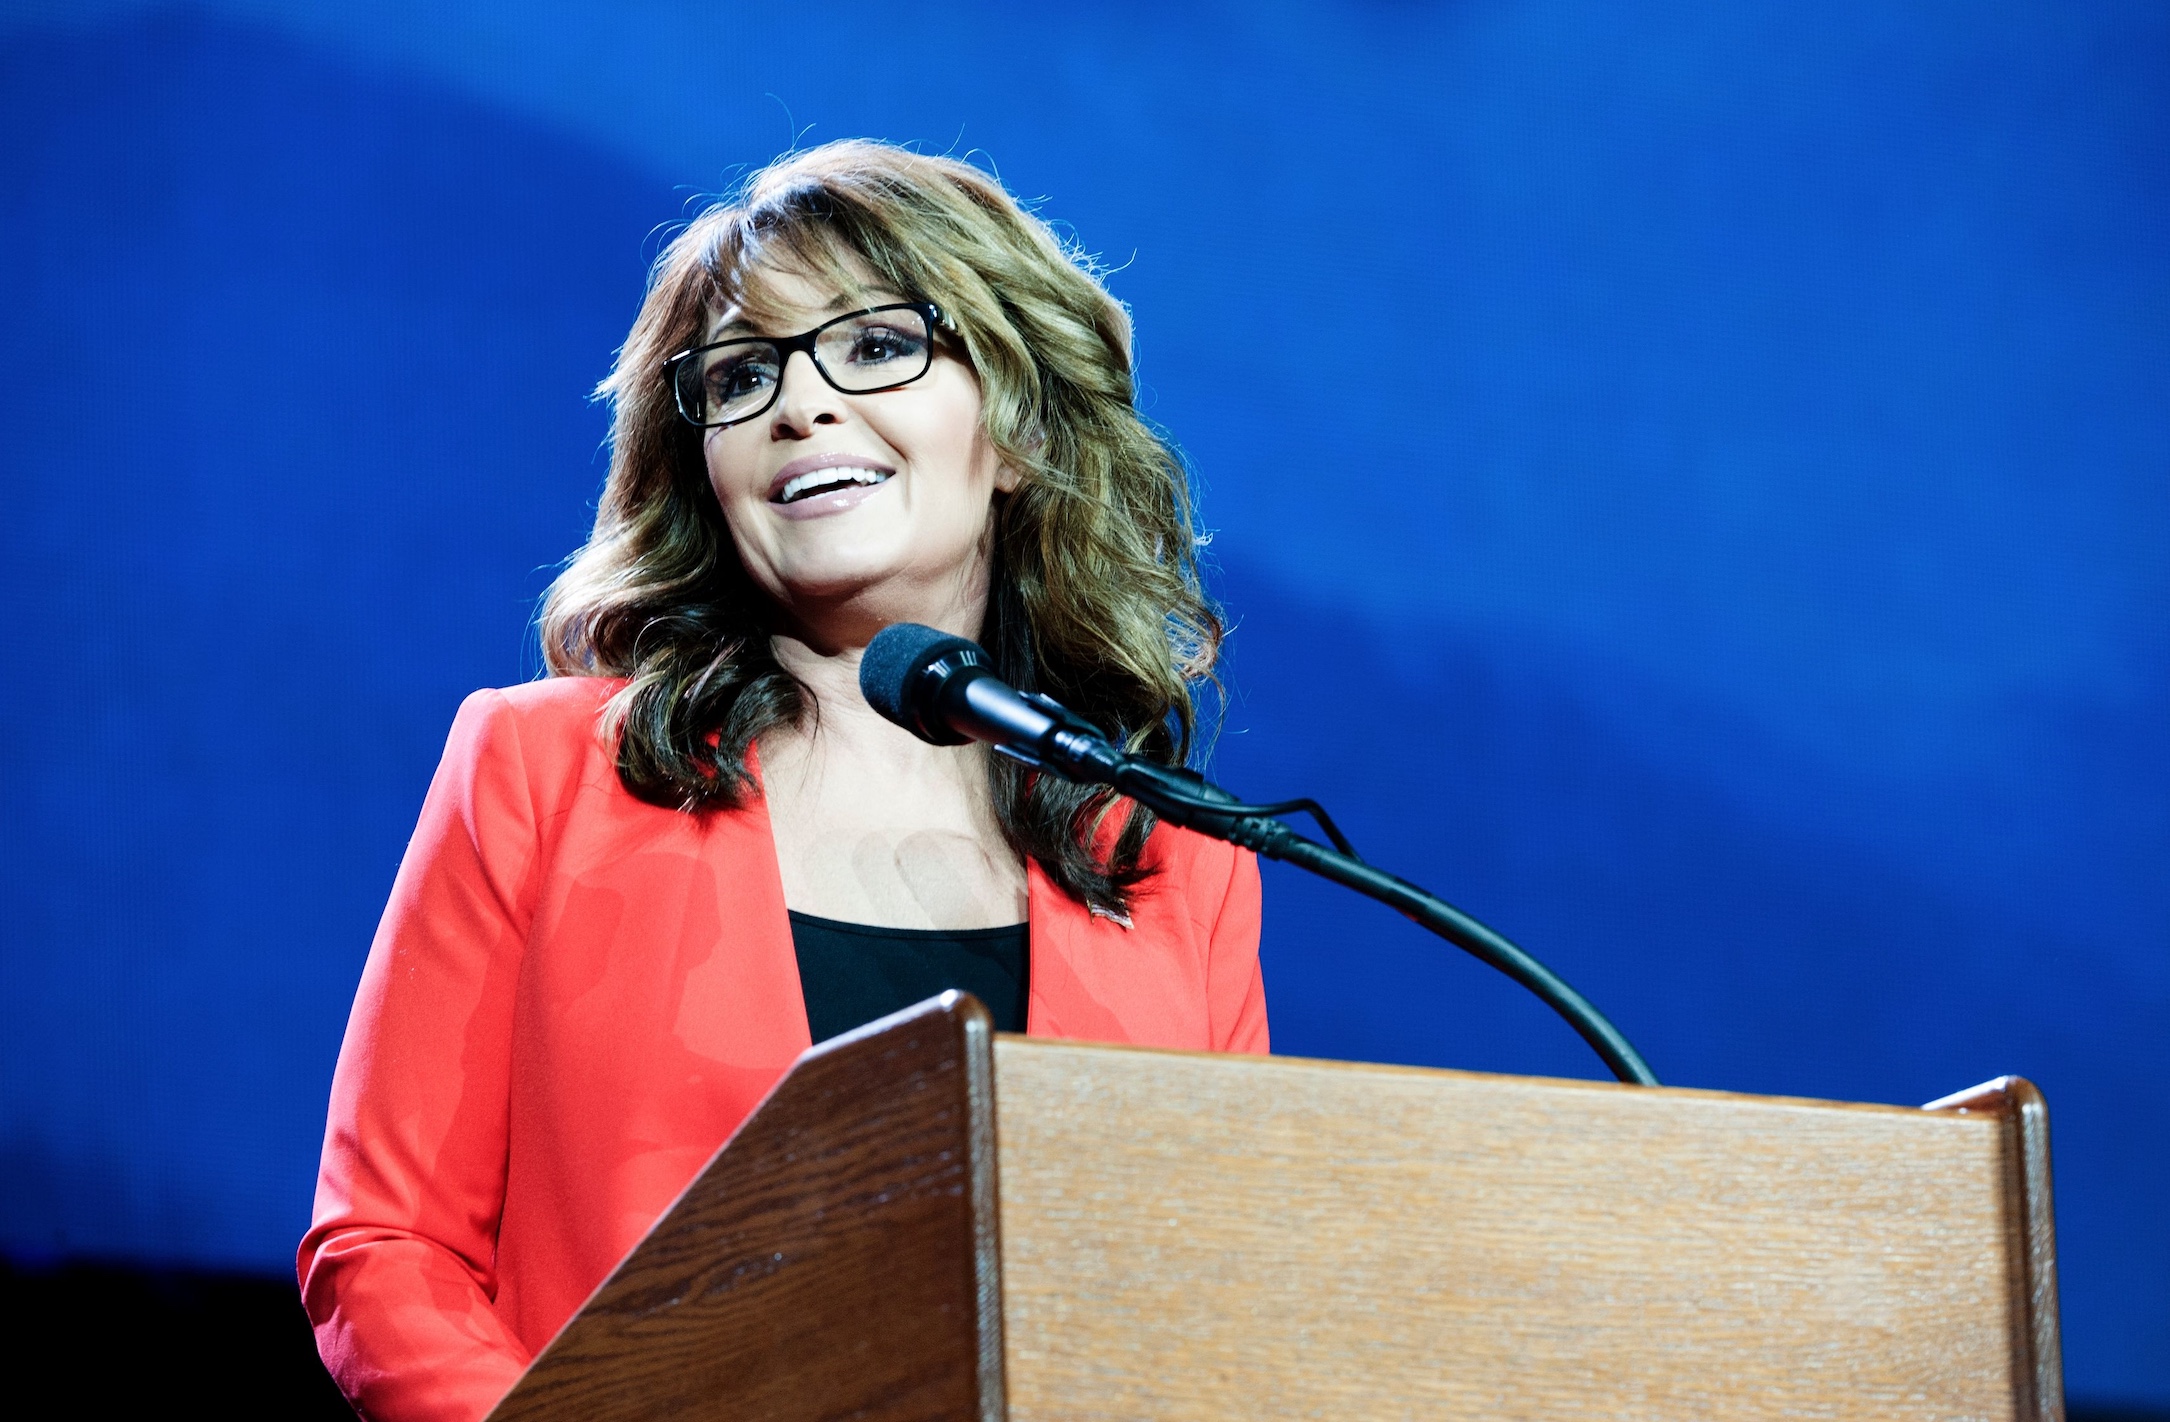 Sarah Palin Announces Congressional Run, Does Not Appear to Be April Fool’s Joke